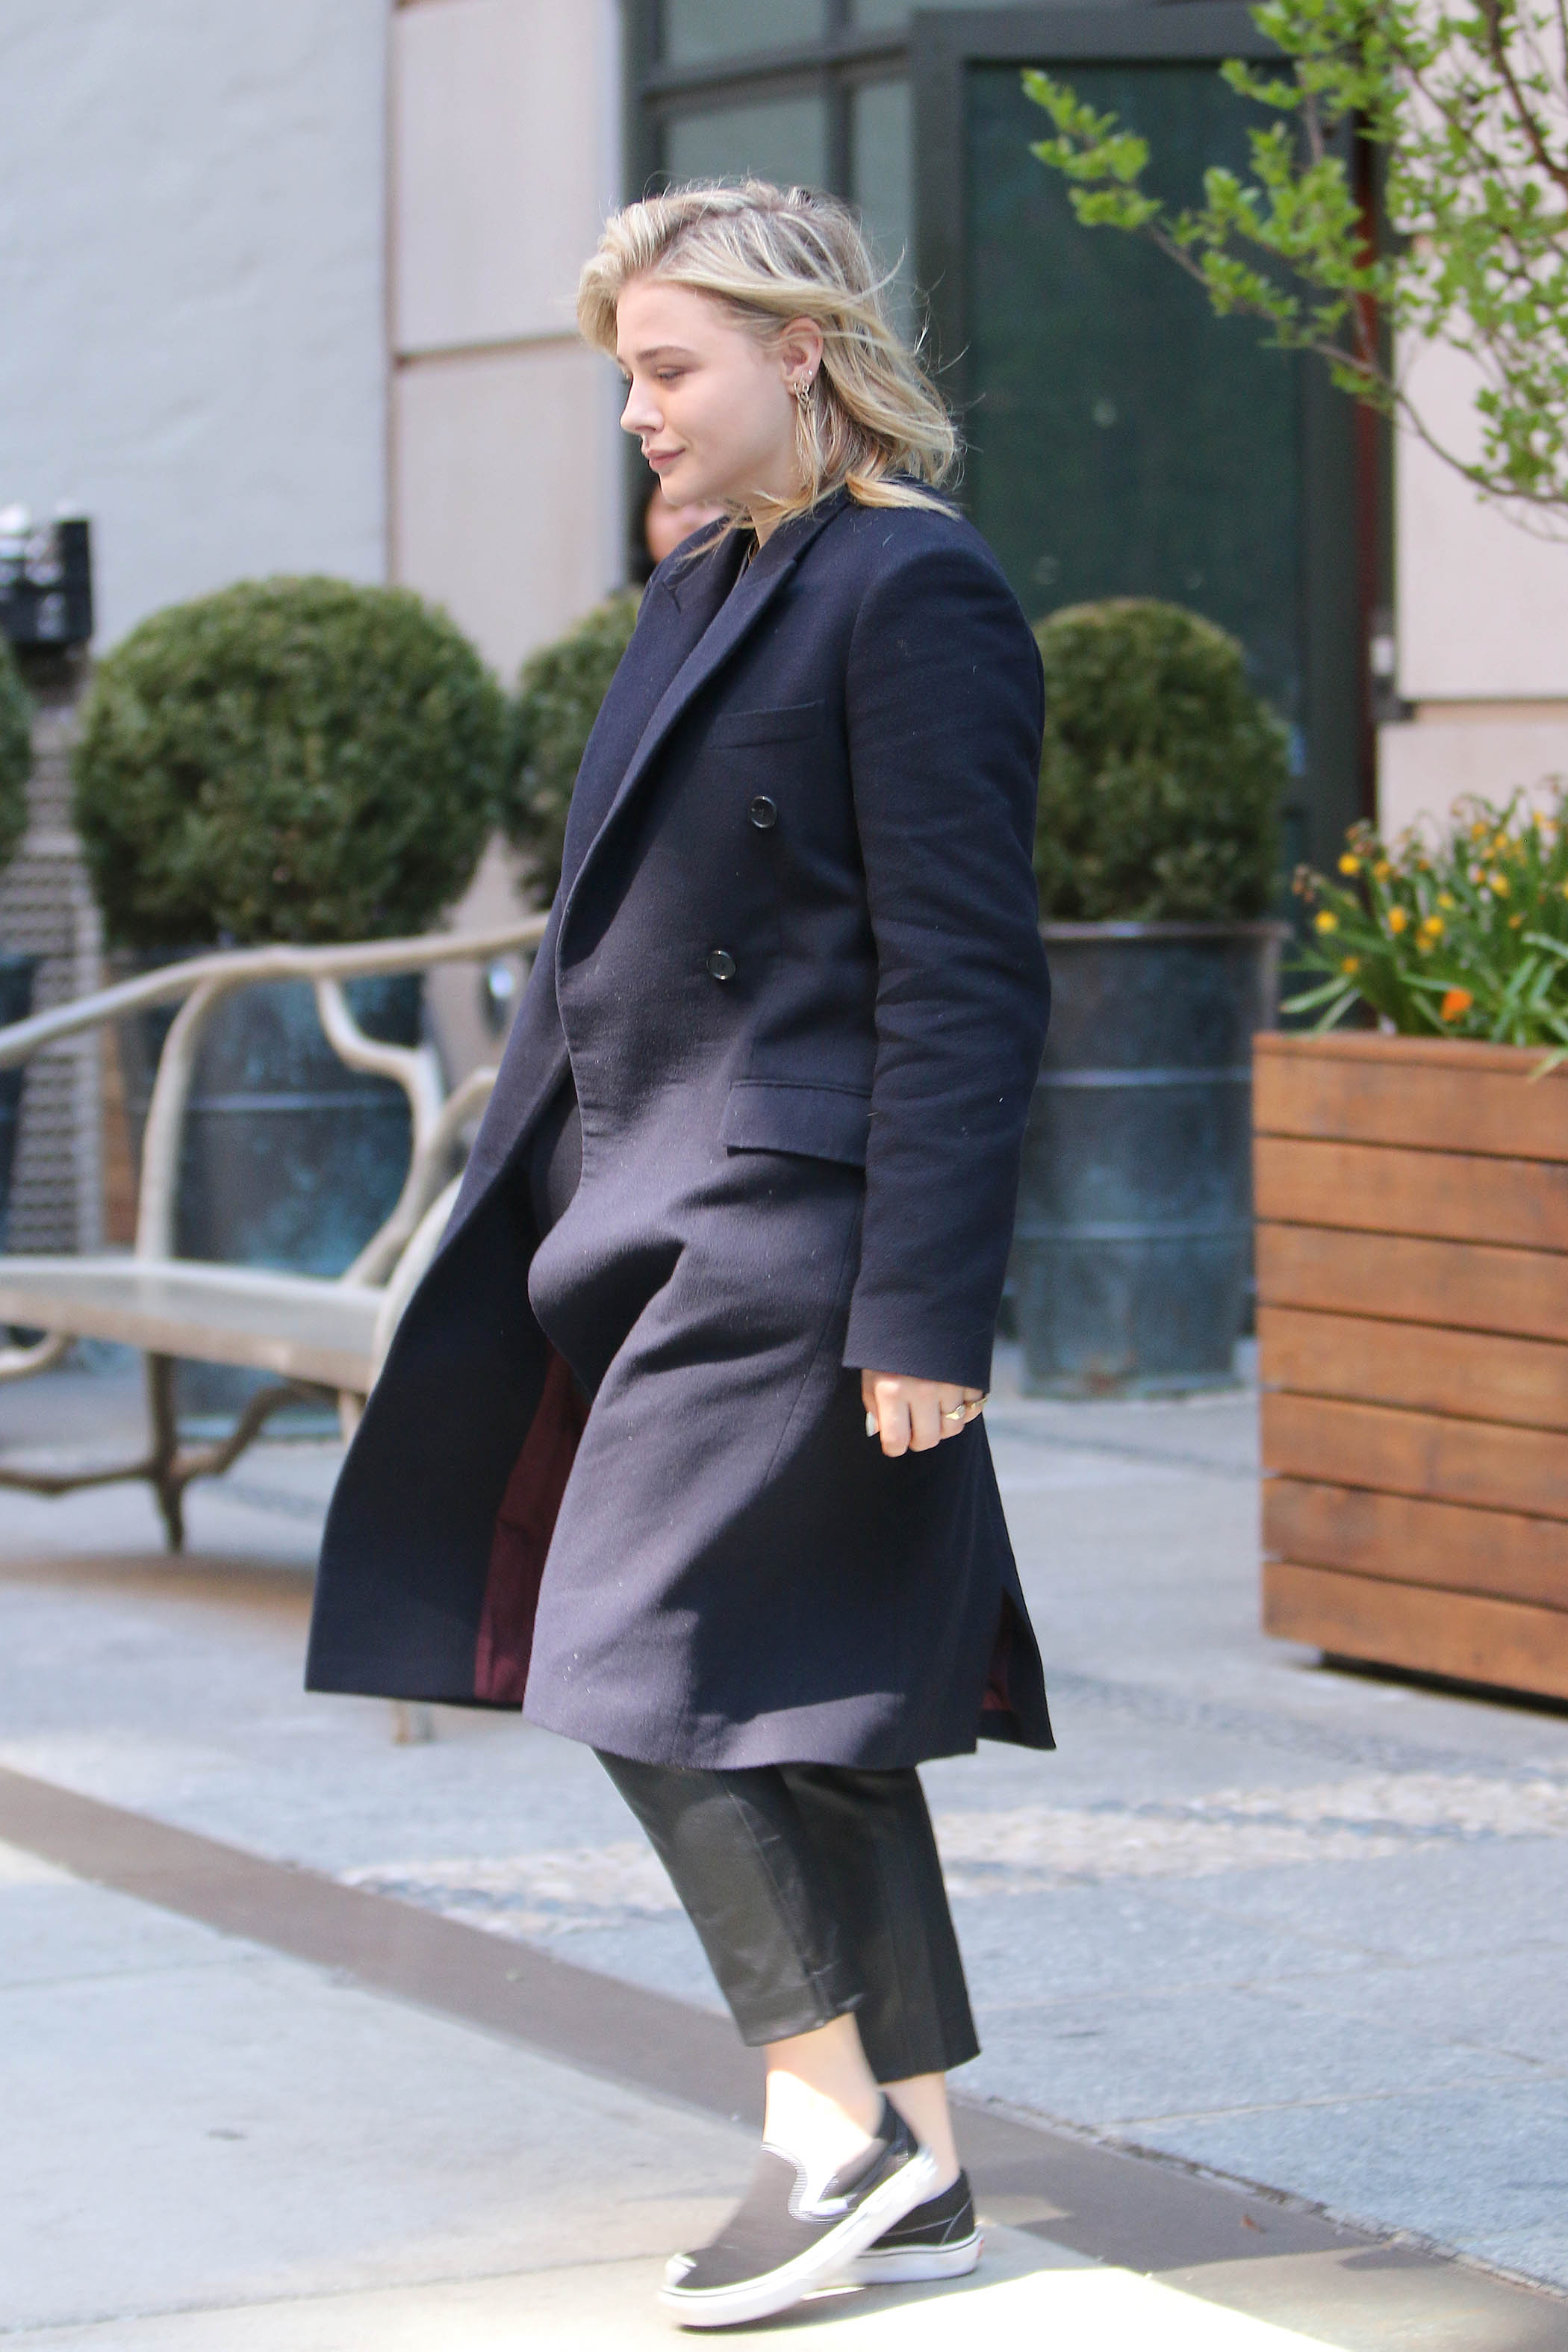 Chloe Moretz out in NYC